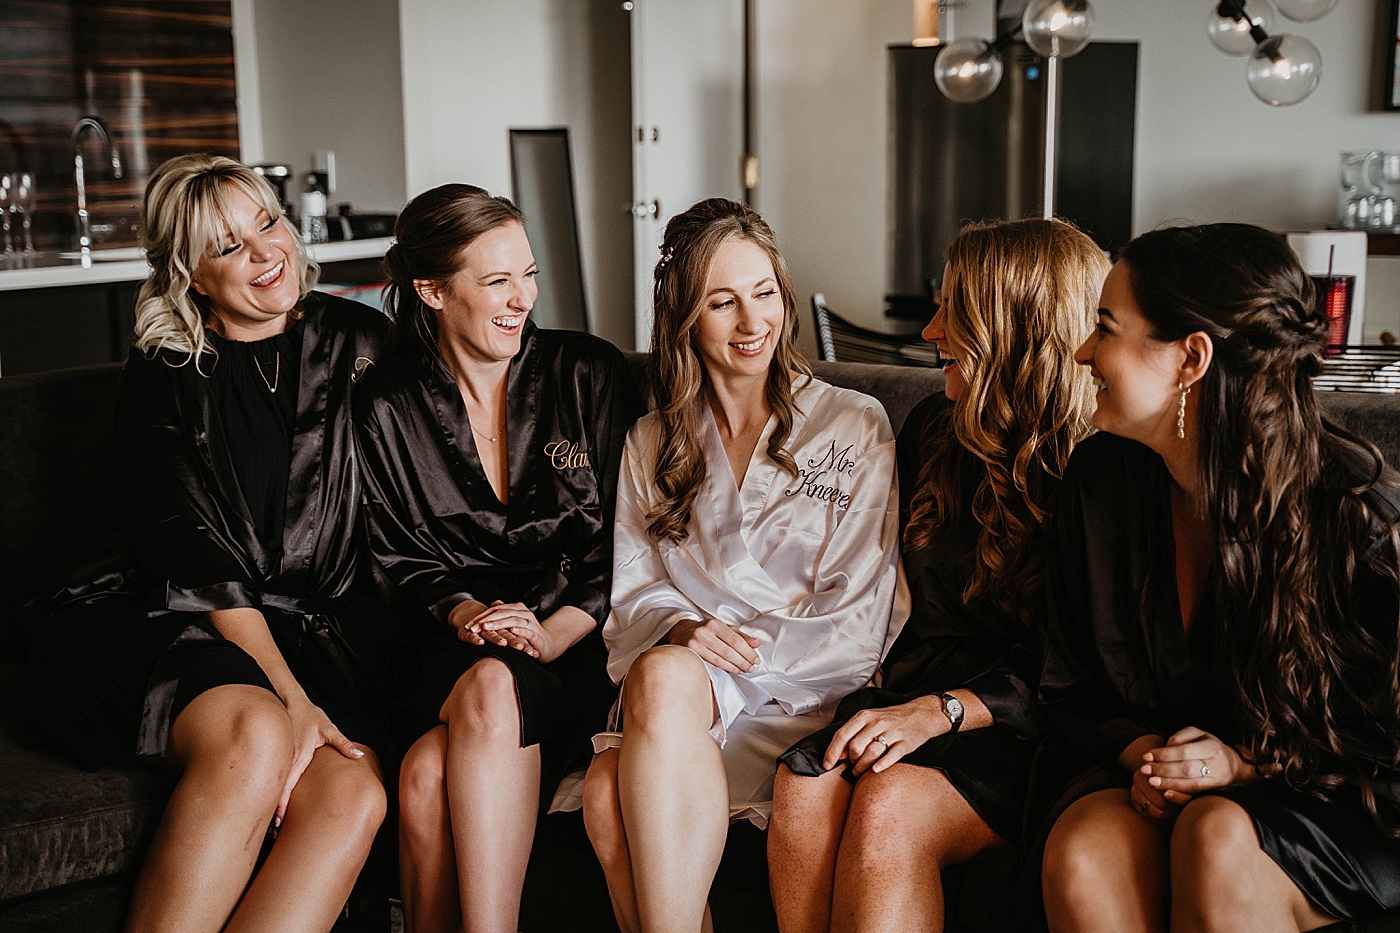 Bride getting ready with Bridemaids Waterstone Resort and Marina Wedding captured by South Florida Wedding Photographer Krystal Capone Photography